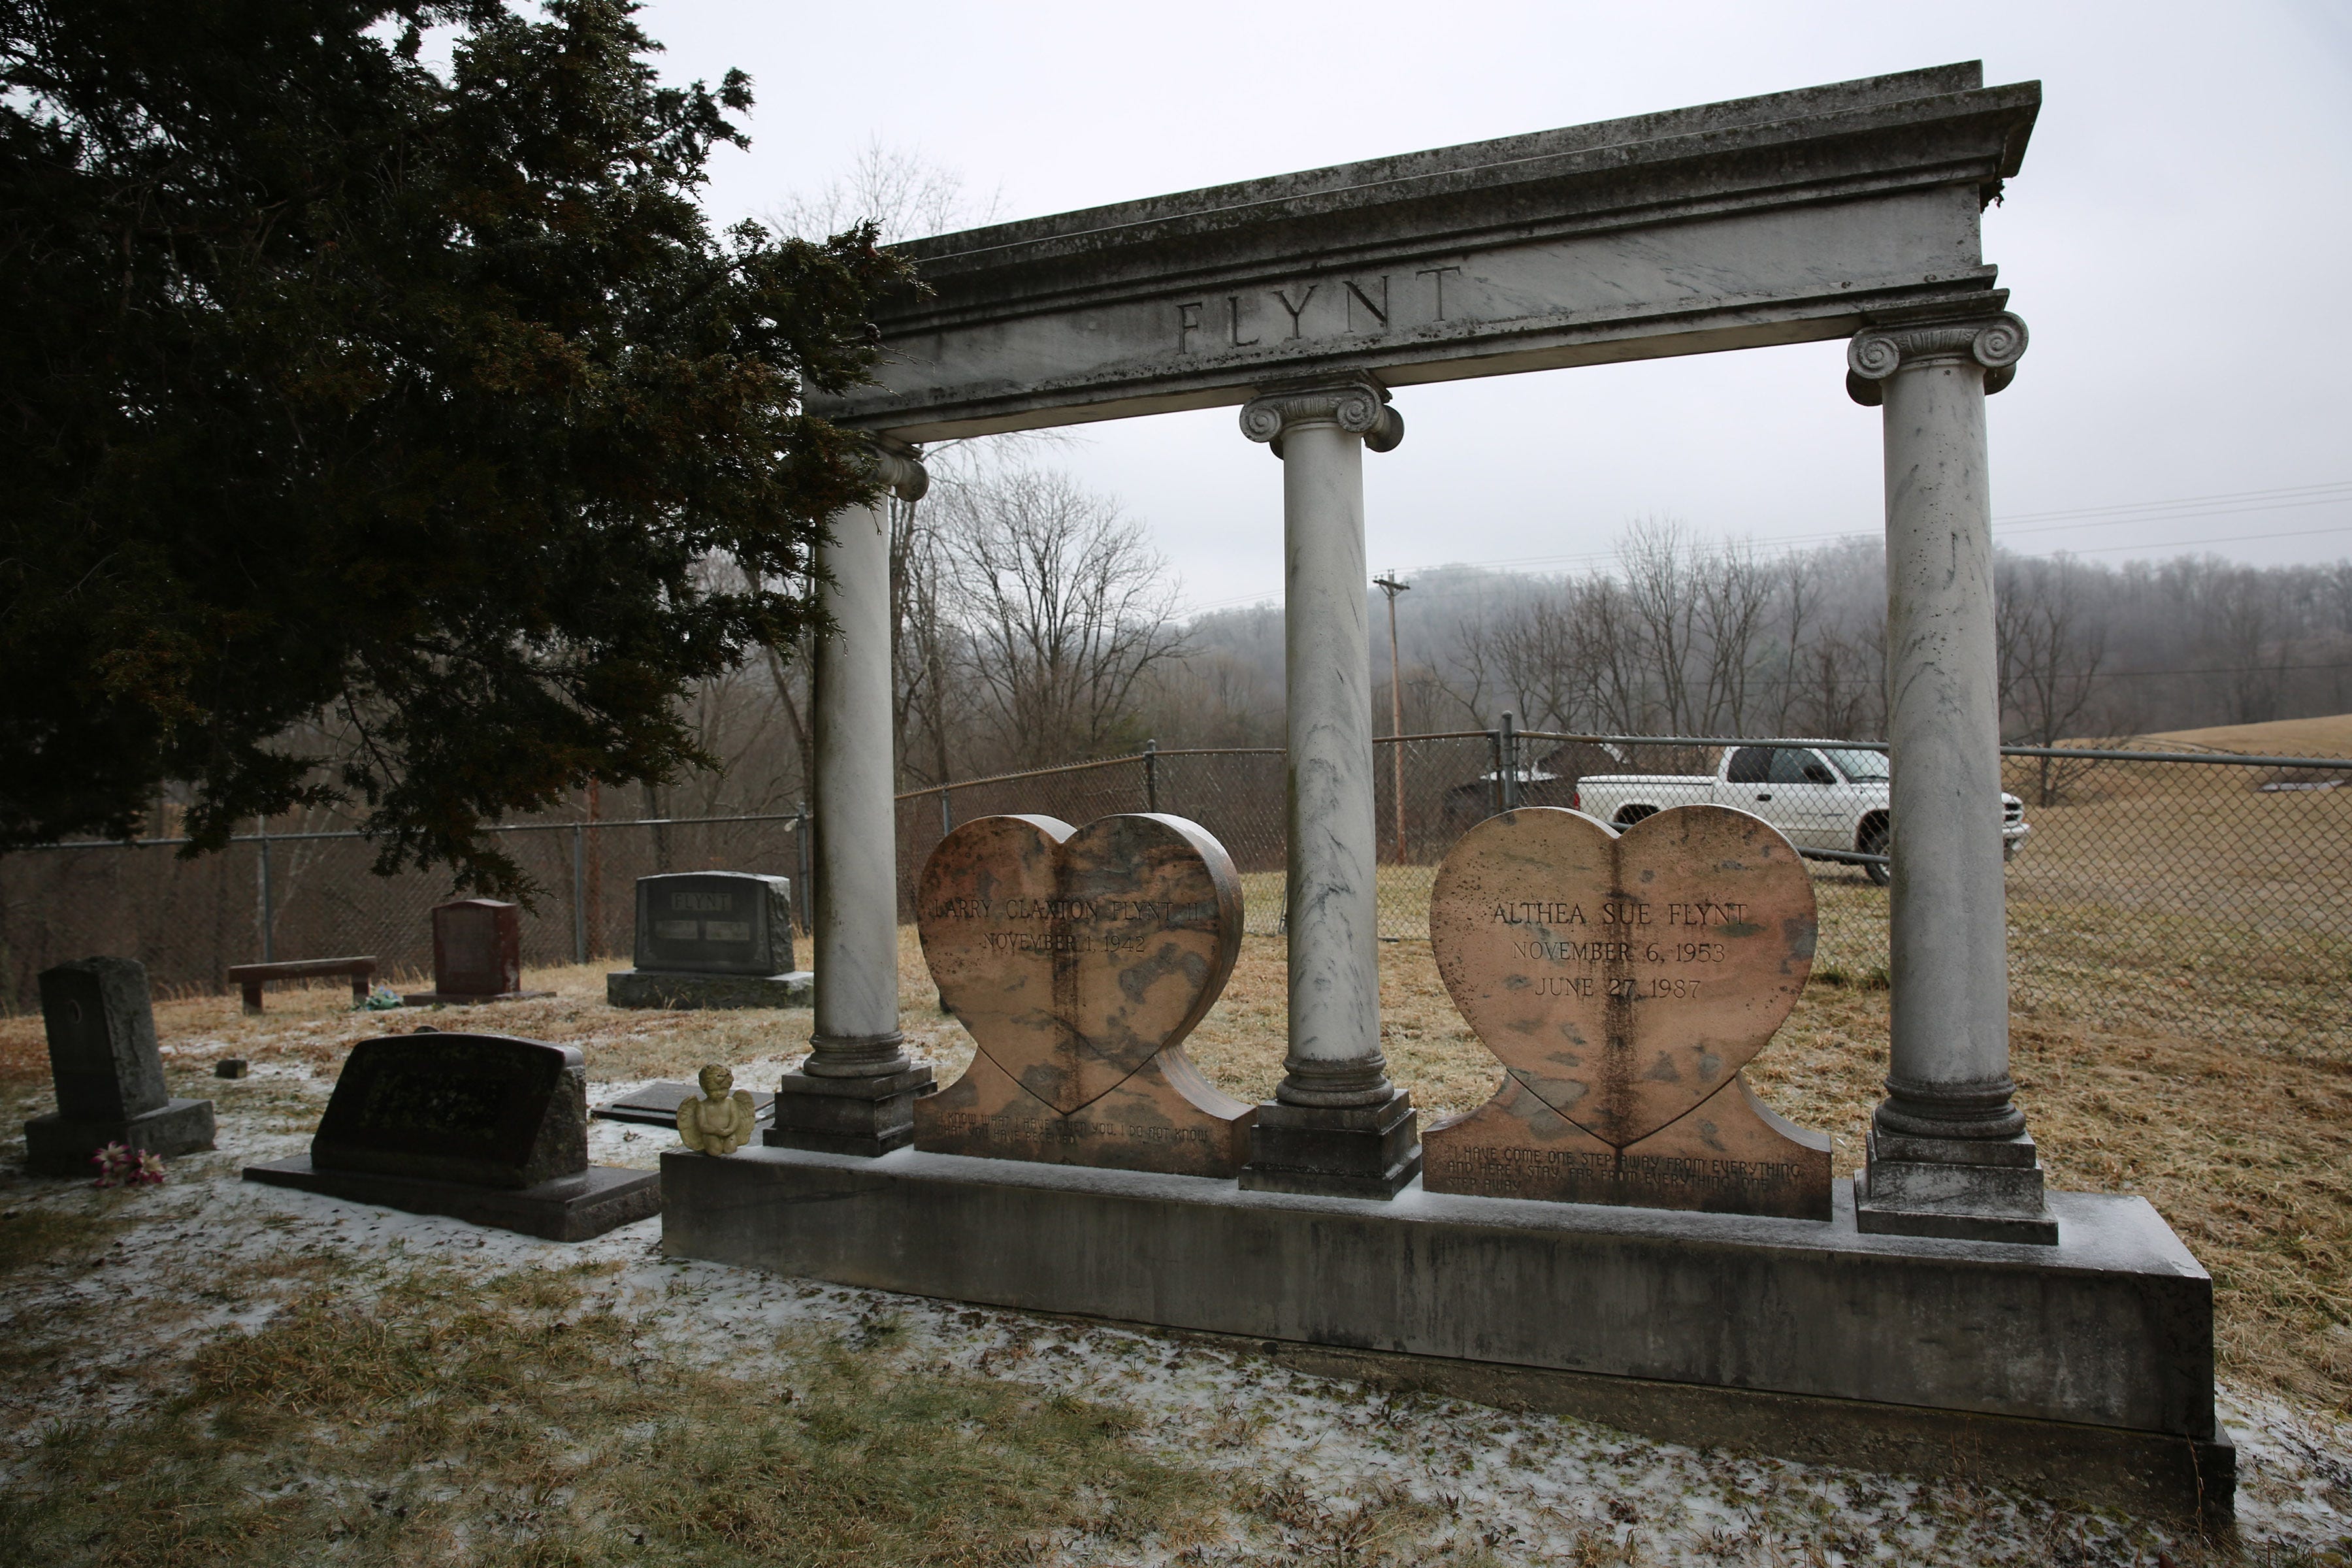 The Magoffin County Ky. grave of Hustler founder Larry Flynt's fourth wife, Althea, who died in 1987. At the time, Larry Flynt intended to be buried next to her.